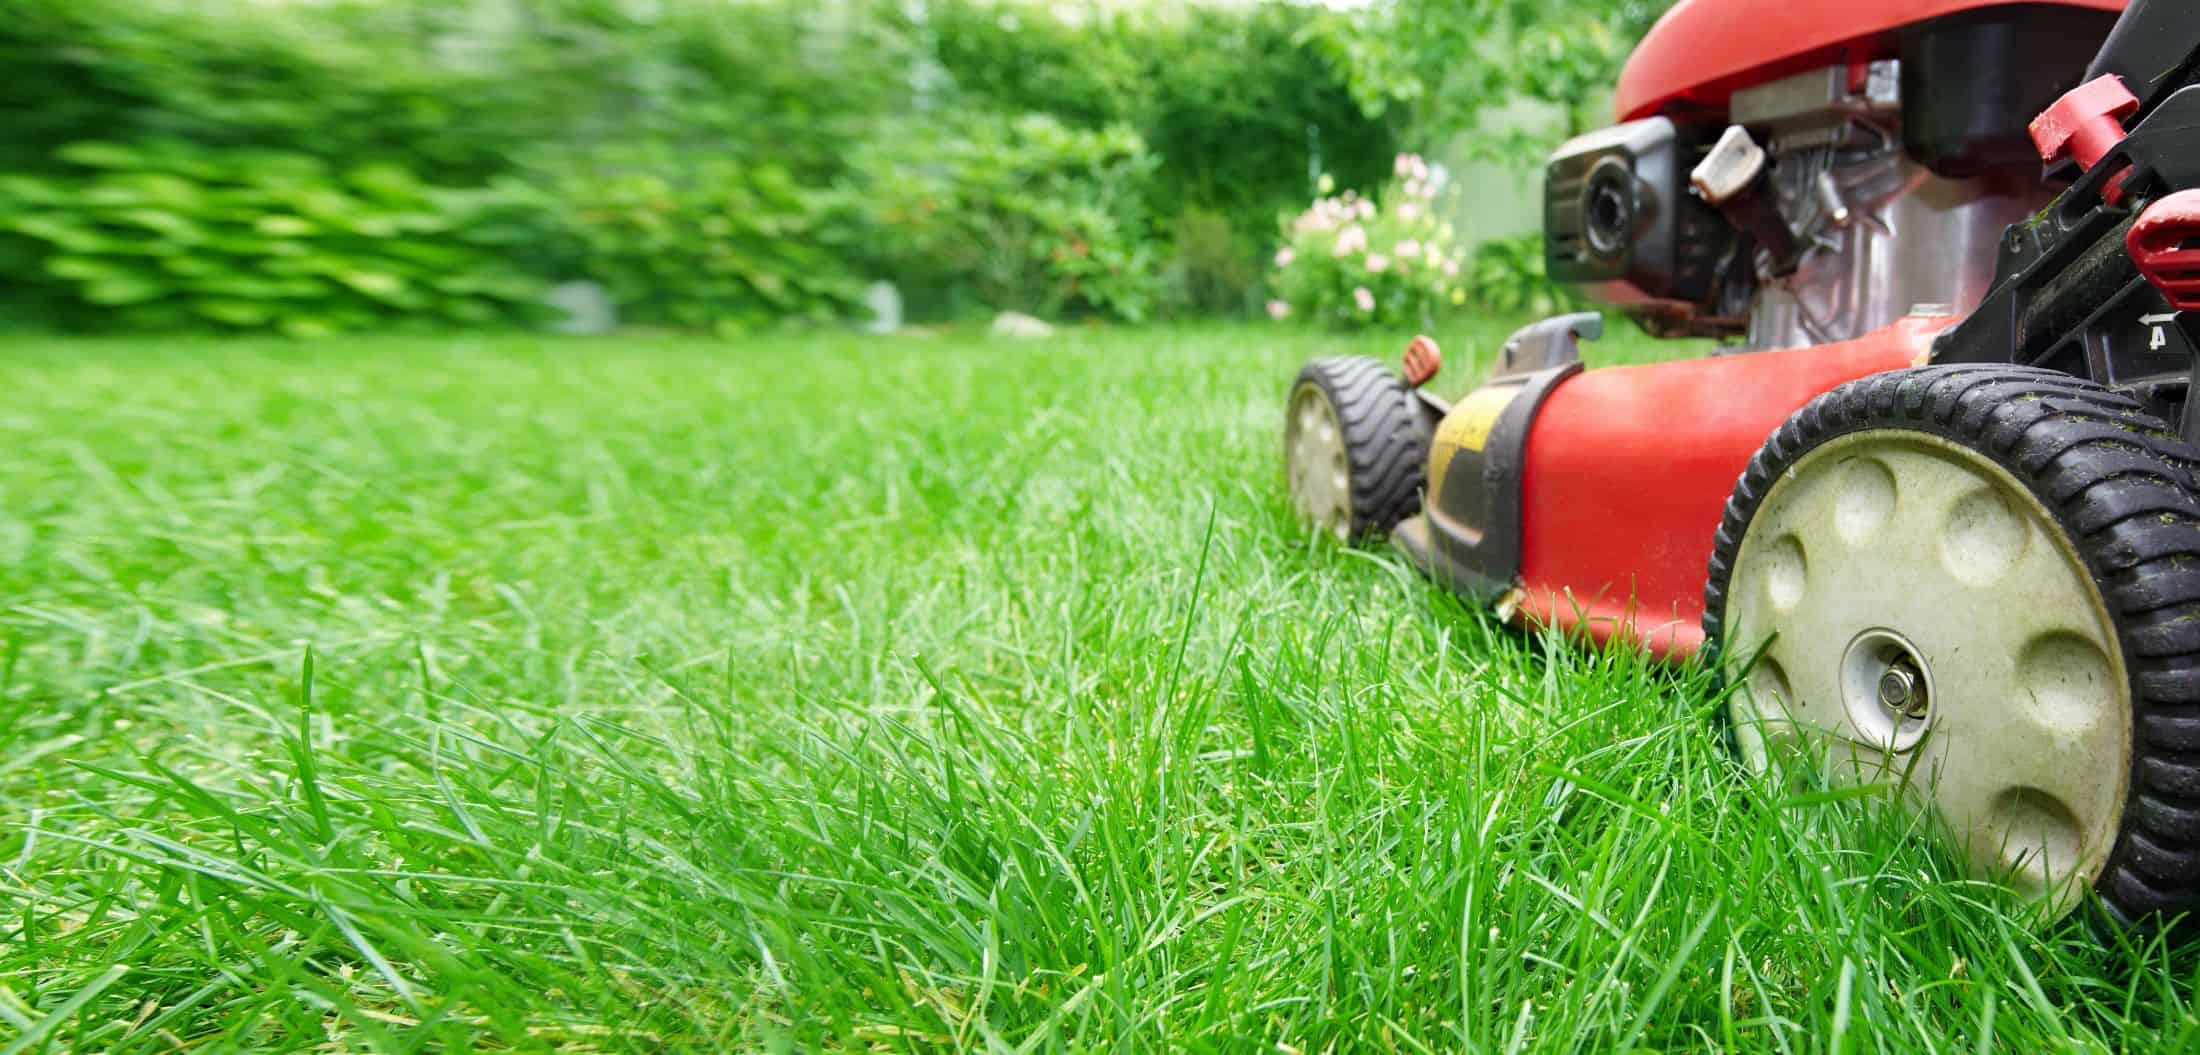 5 Lawn Care Tips for Greener Grass | Home, Garden and Homestead